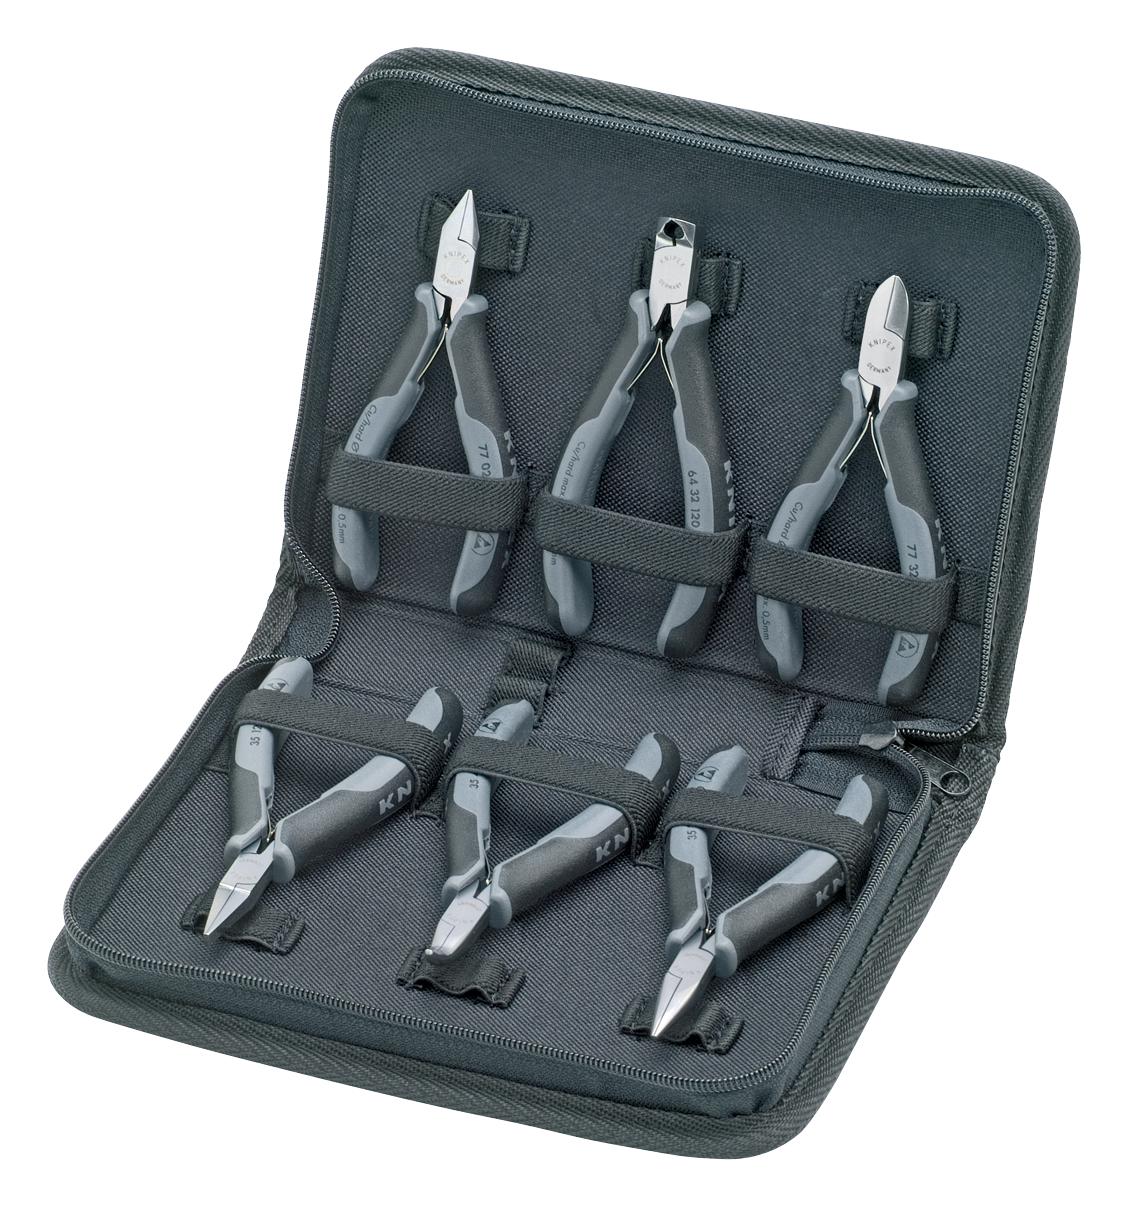 00 20 17 PLIER/CUTTER SET, ESD, 6PC KNIPEX